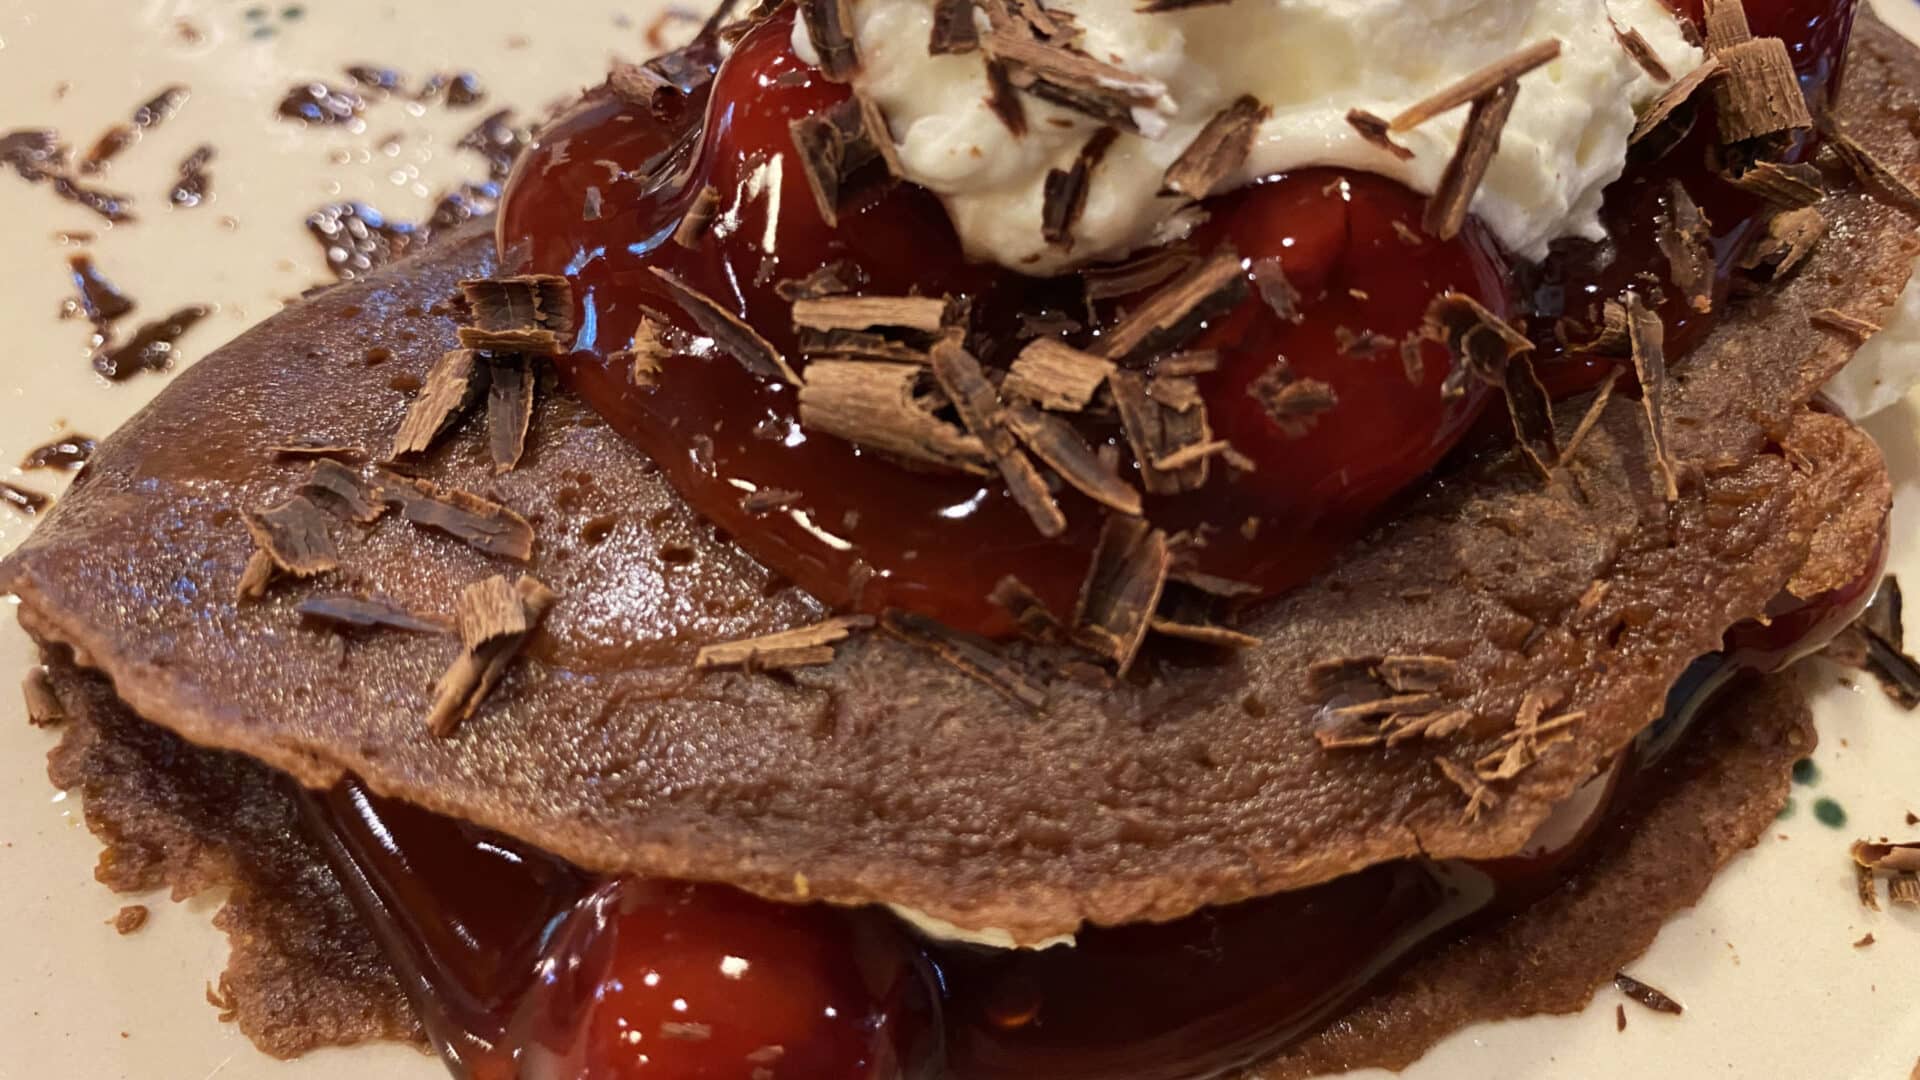 Chocolate crepes with cherry pie filling and cream in between and on top, garnished with shaved chocolate curls